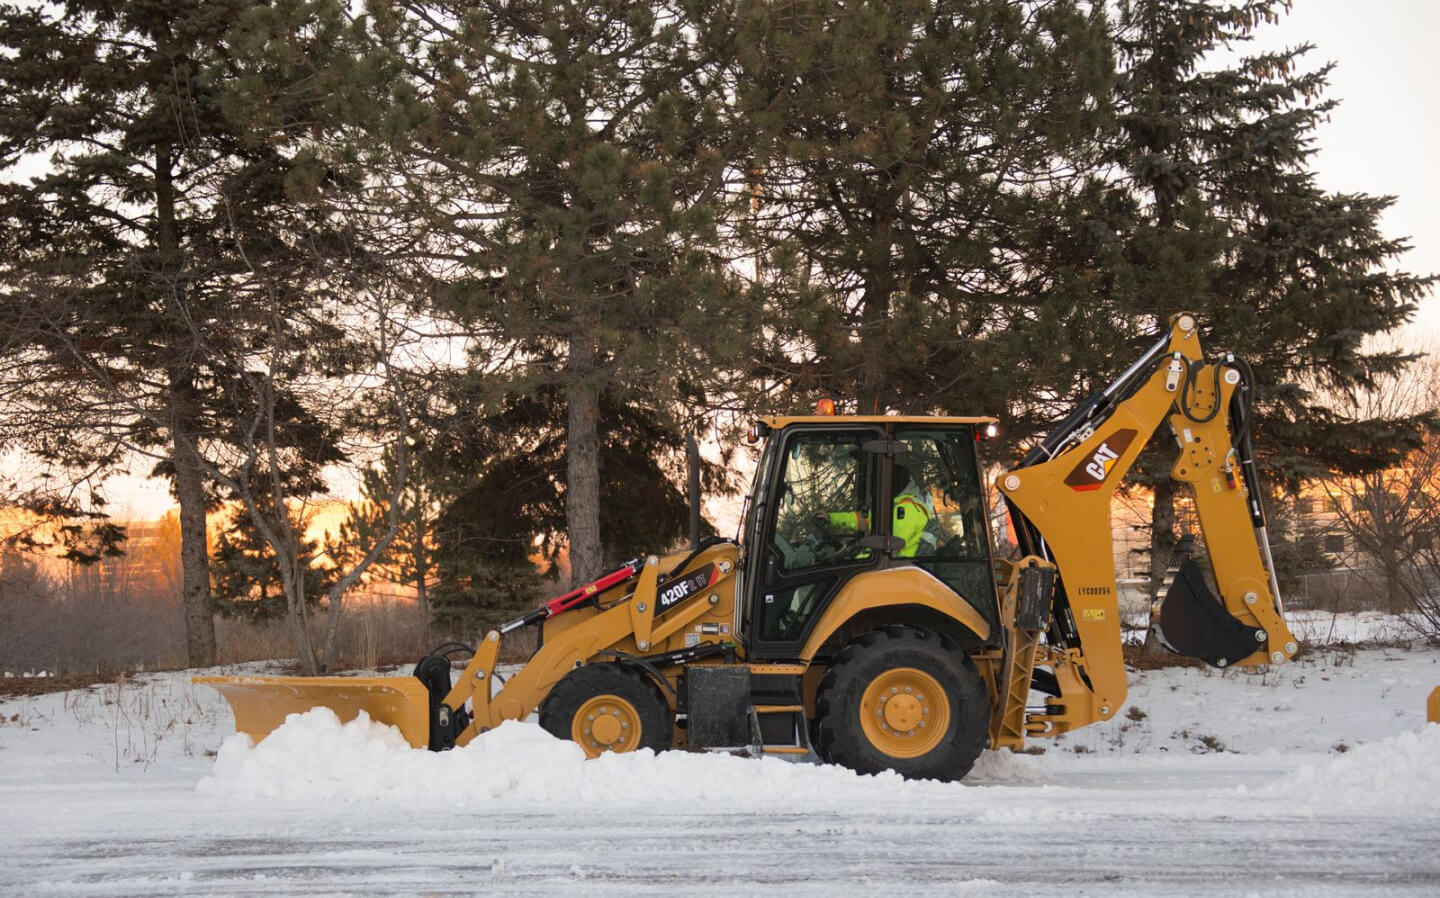 Using your compact equipment